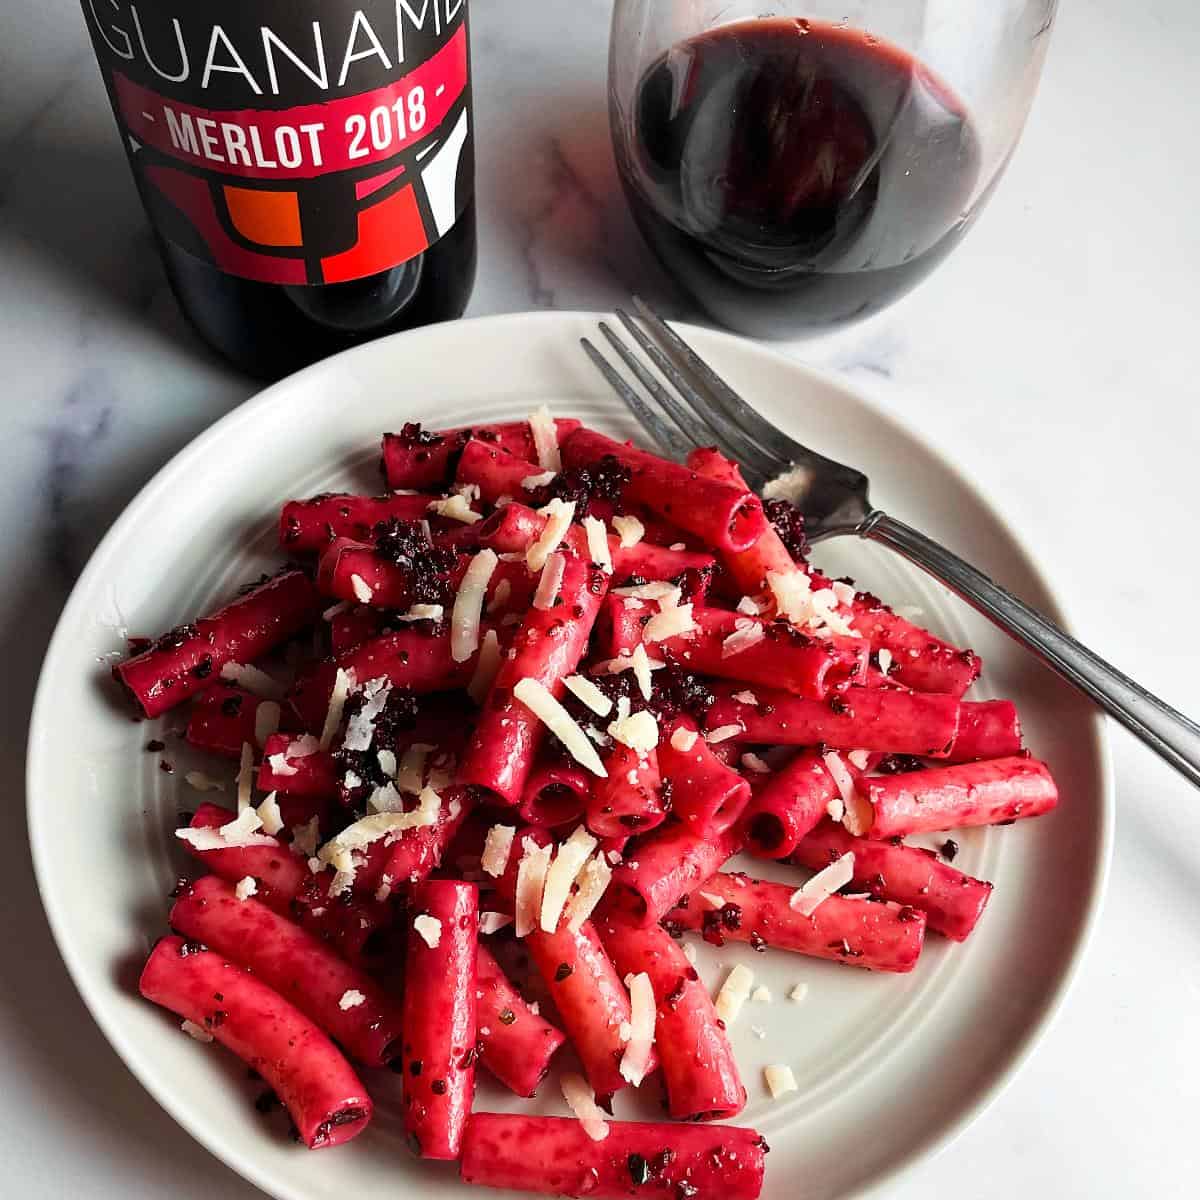 roasted beet pesto pasta on a gray plate, served with a red wine.